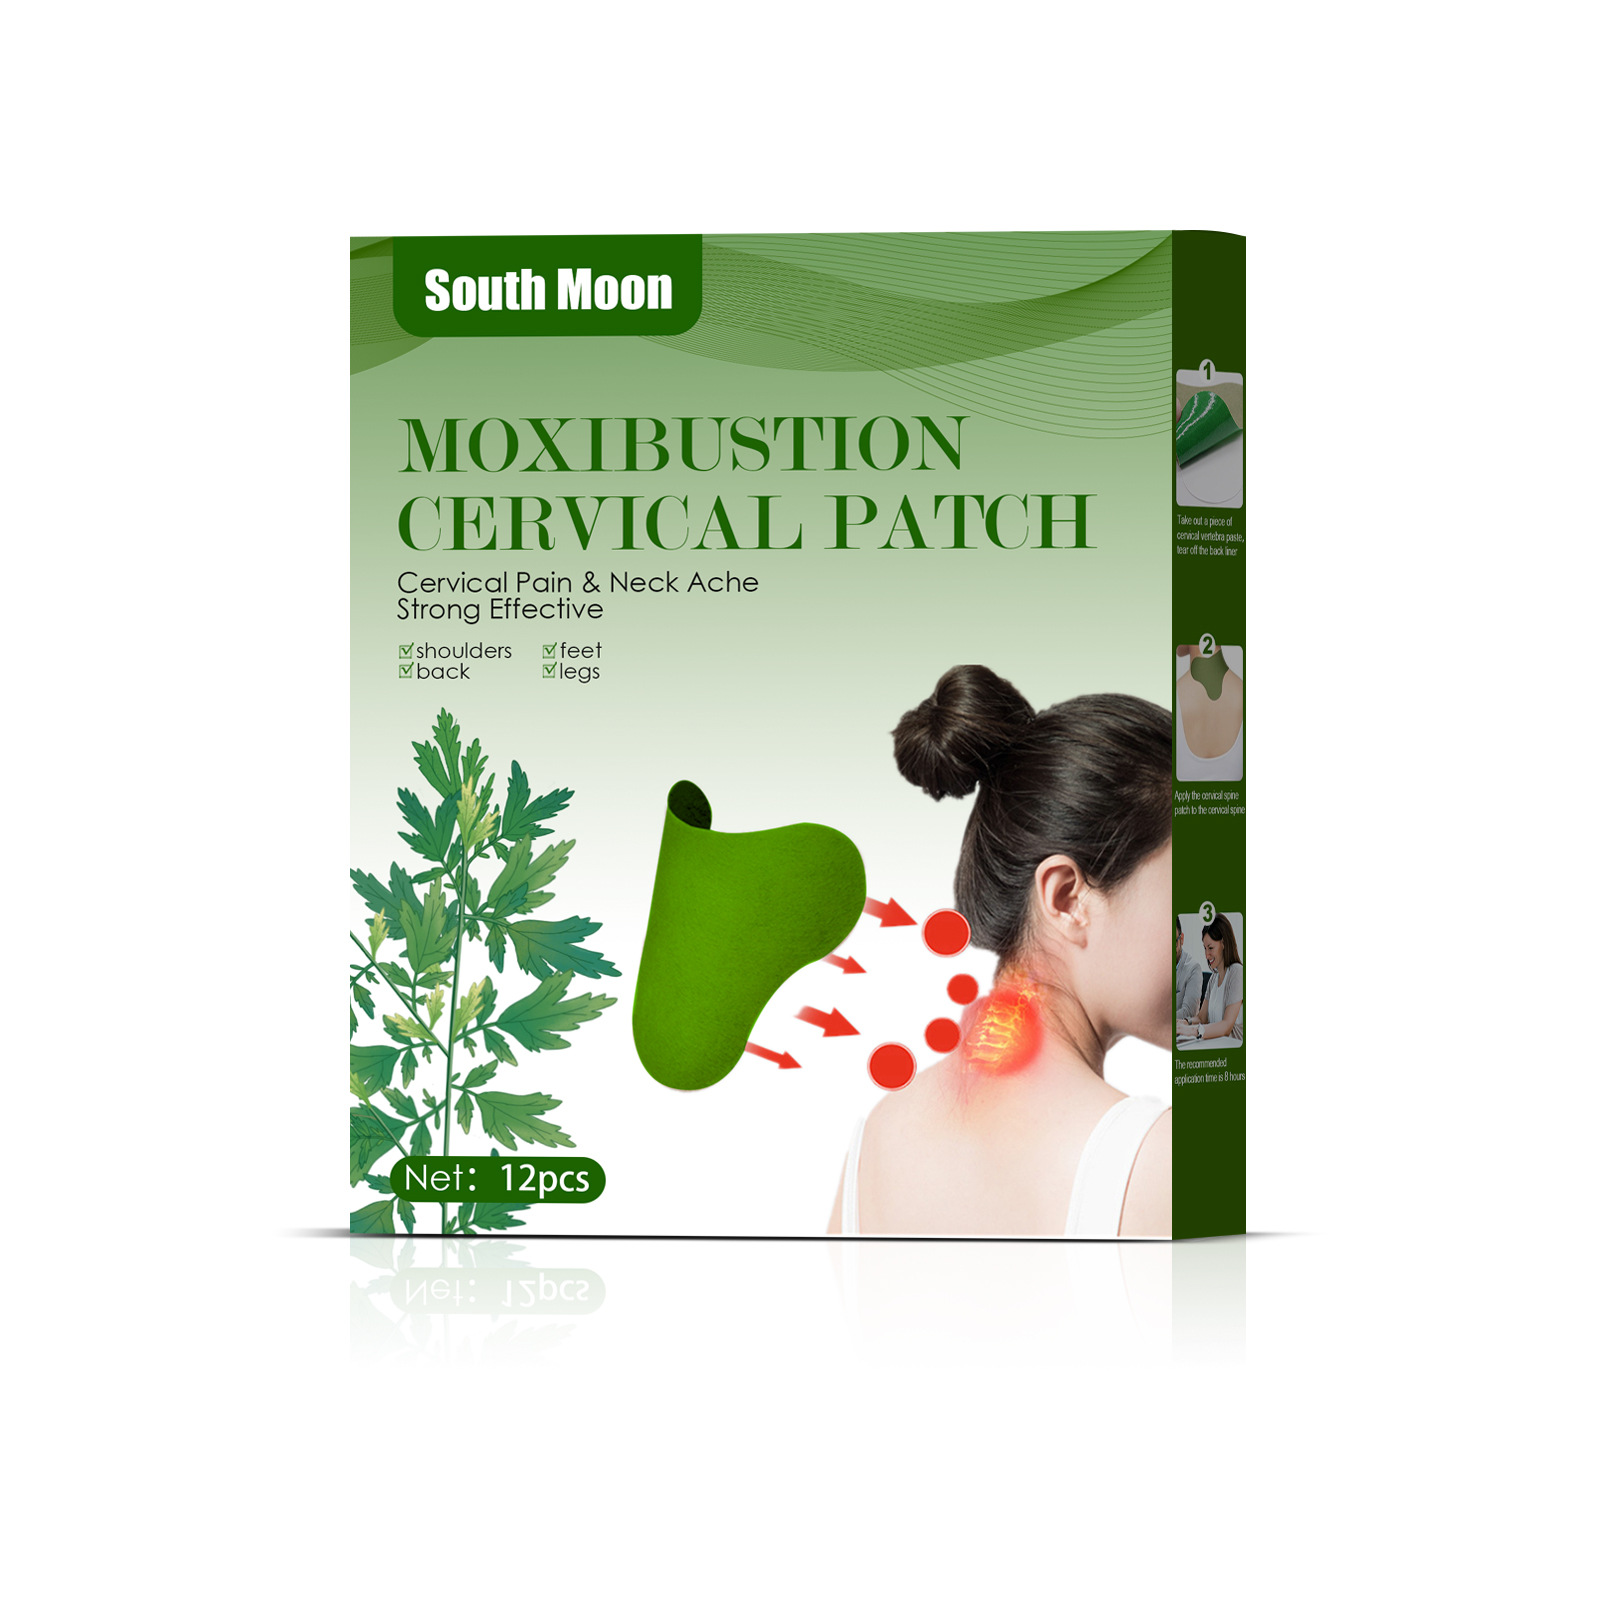 South Moon Argy Wormwood Cervical Sticker Cervical Vertebra Warmer Pad Warm Moxibustion Argy Wormwood Patch Neck Hump Hot Compress Patch Pain Relieving Plaster